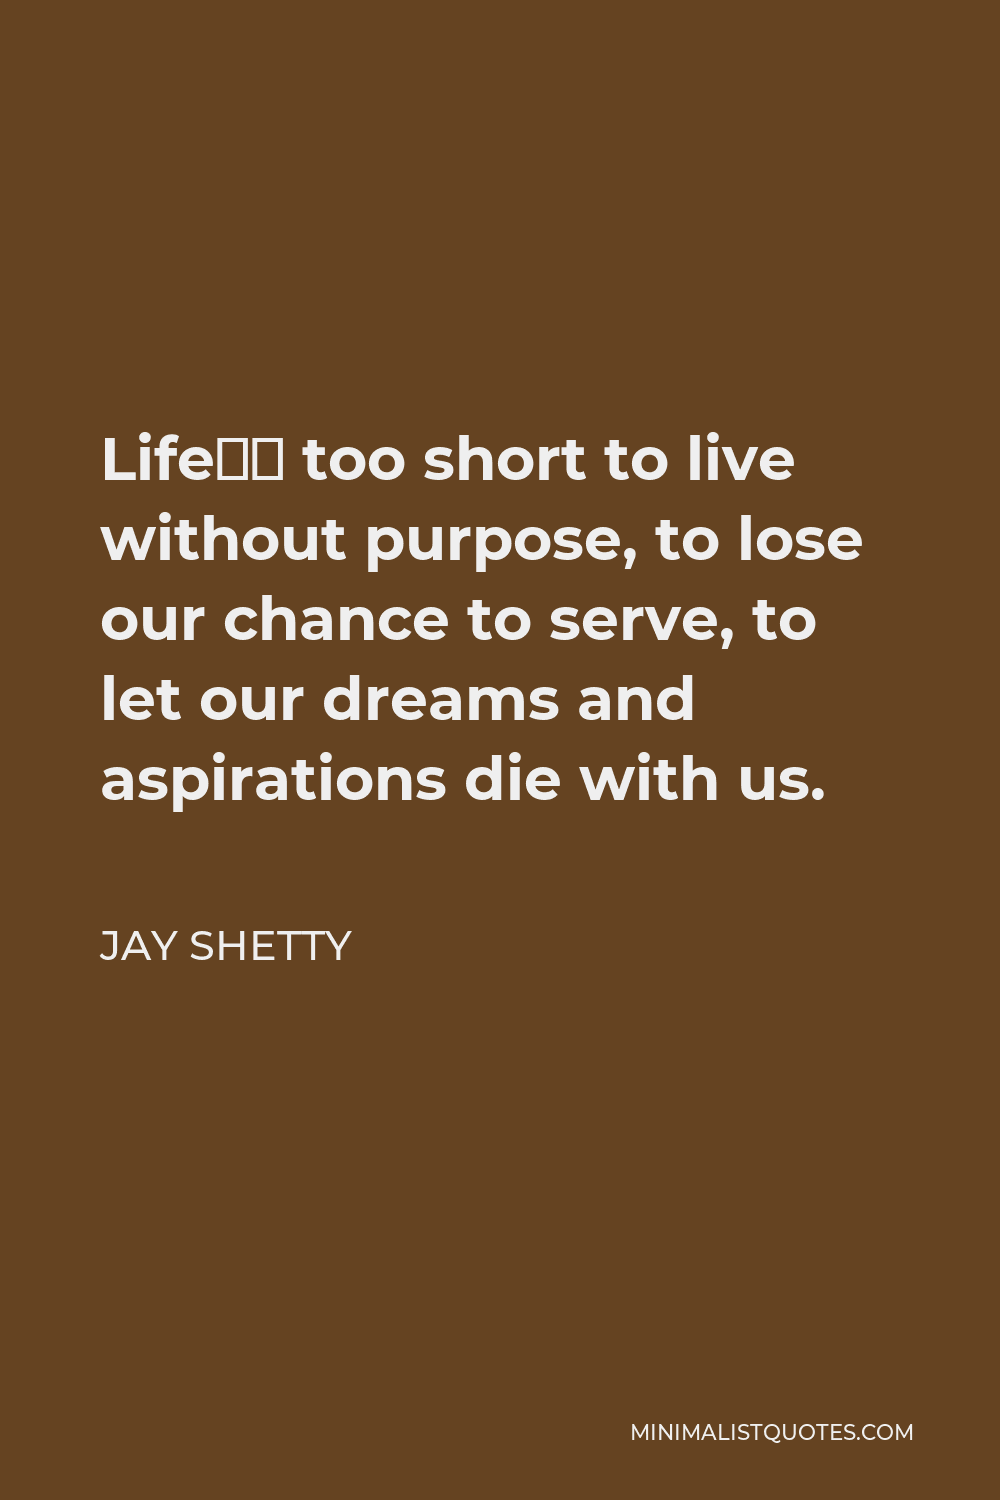 Jay Shetty Quote - Life’s too short to live without purpose, to lose our chance to serve, to let our dreams and aspirations die with us.